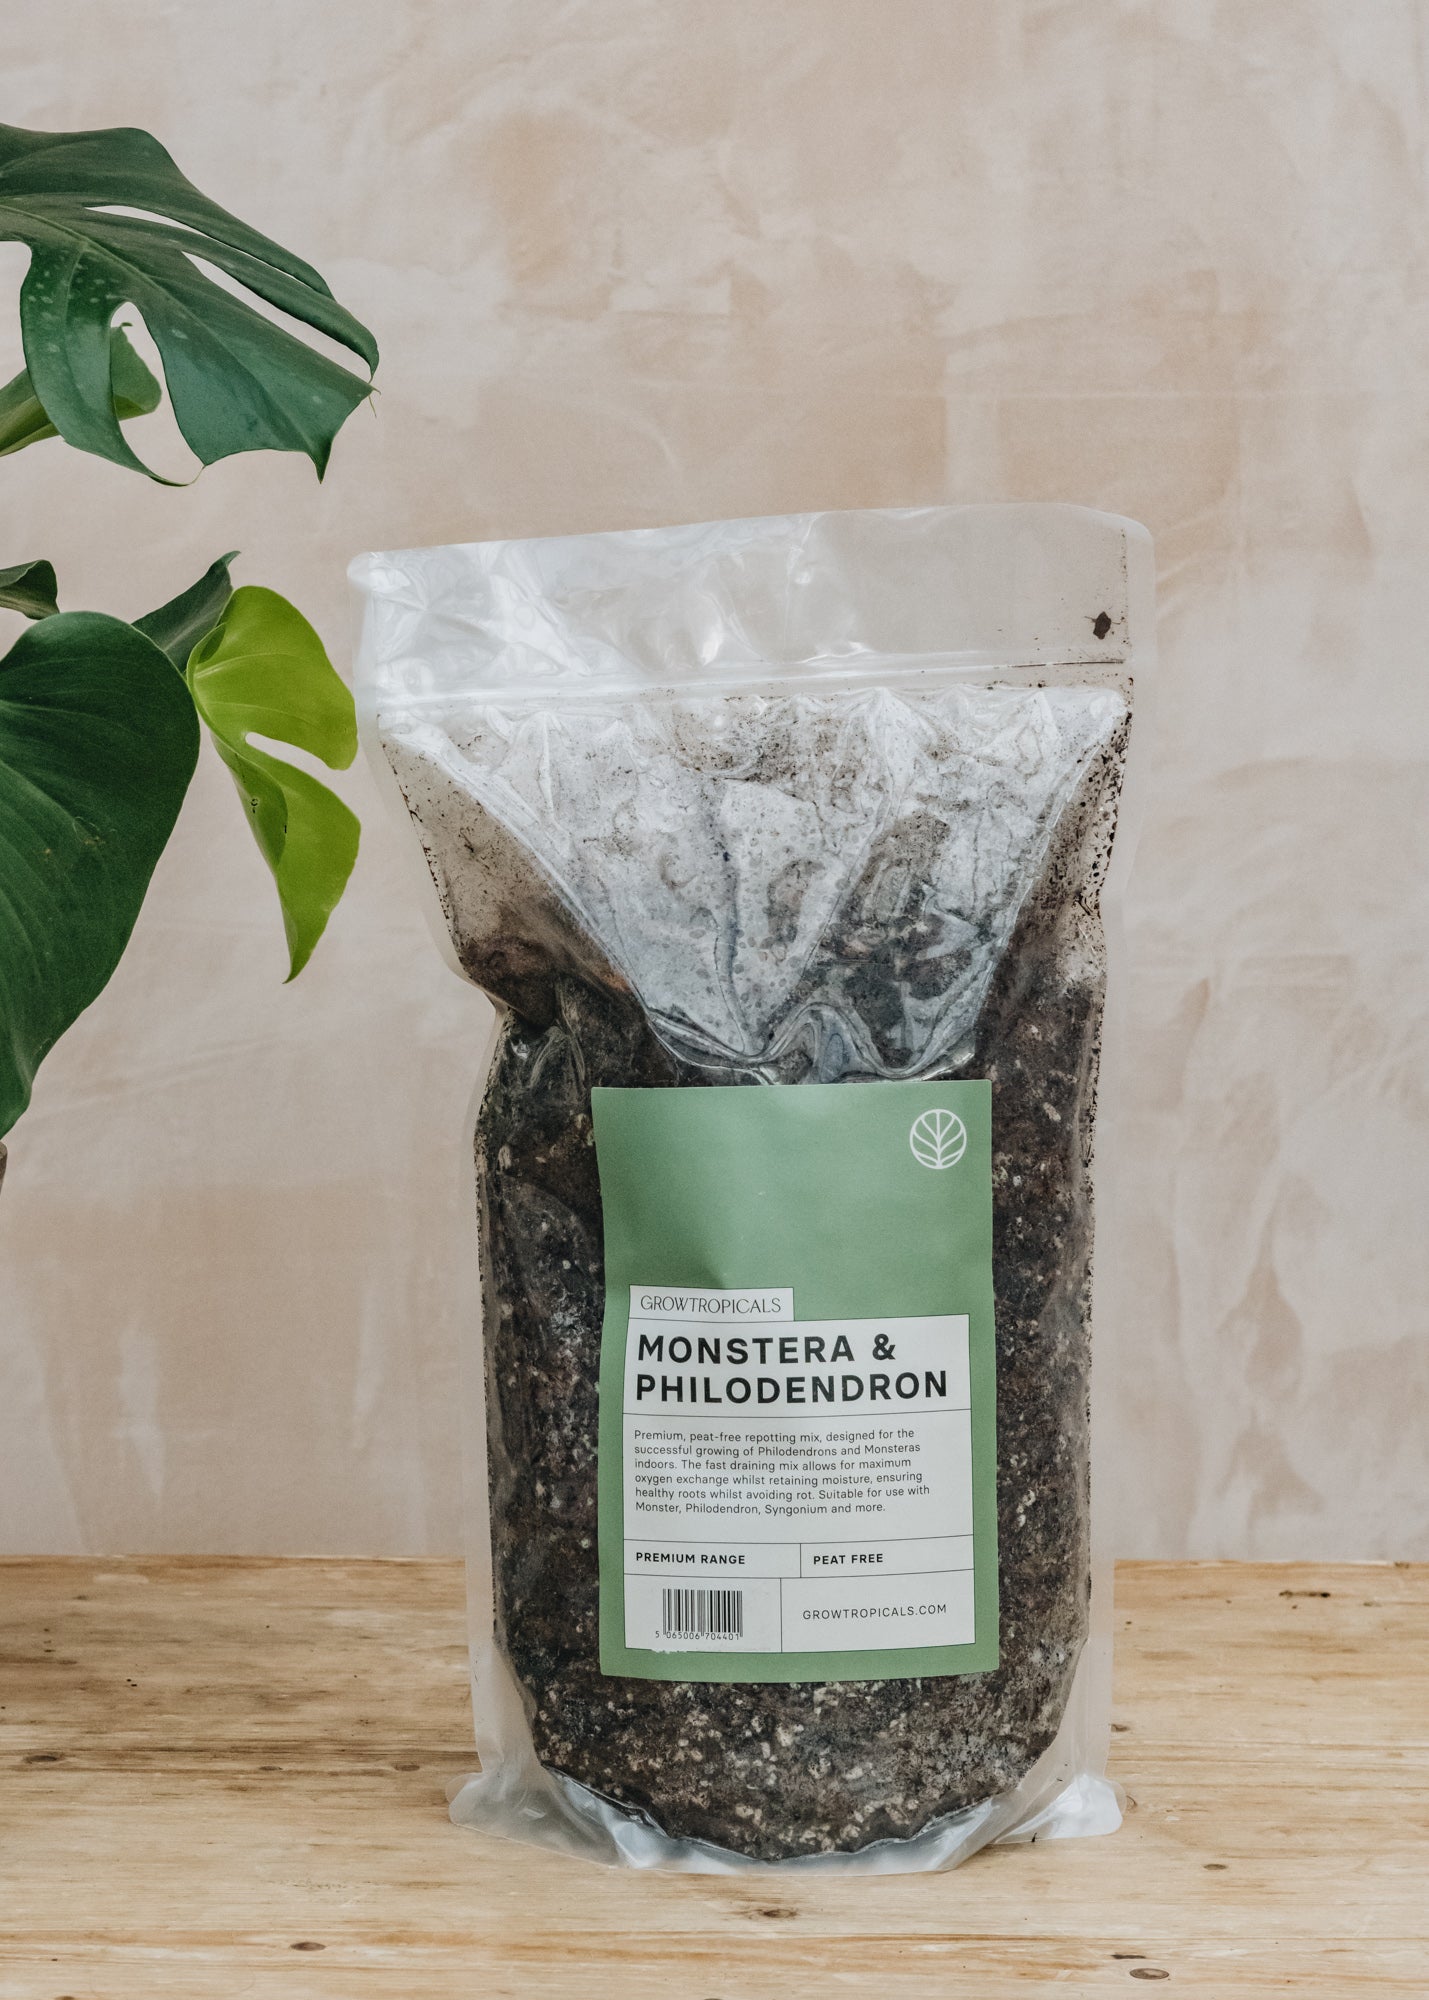 Philodendron and Monstera Potting Mix